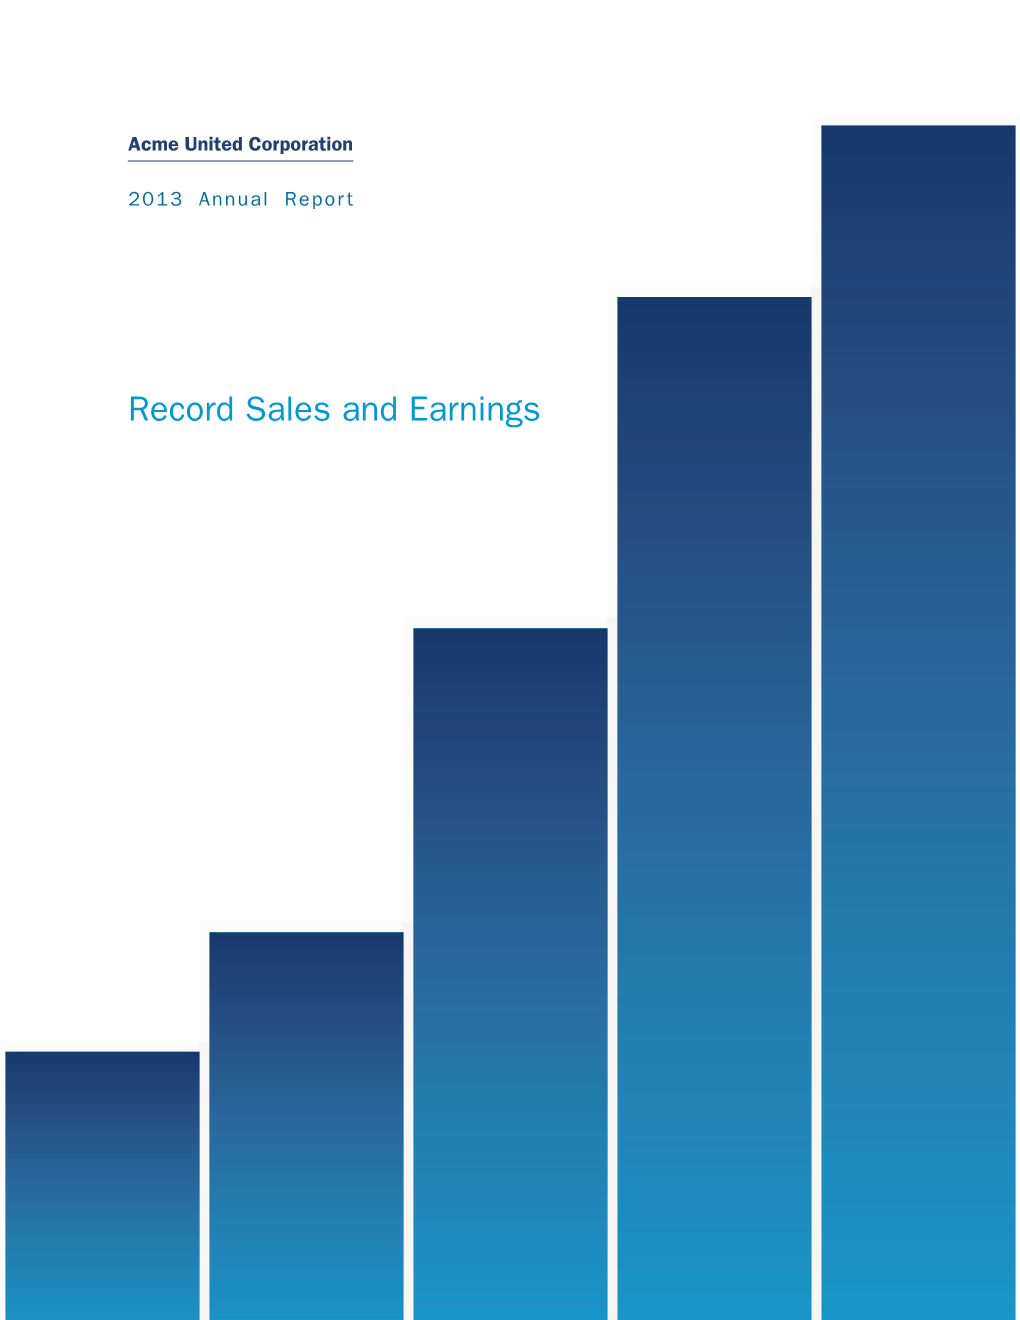 Record Sales and Earnings Financial Highlights